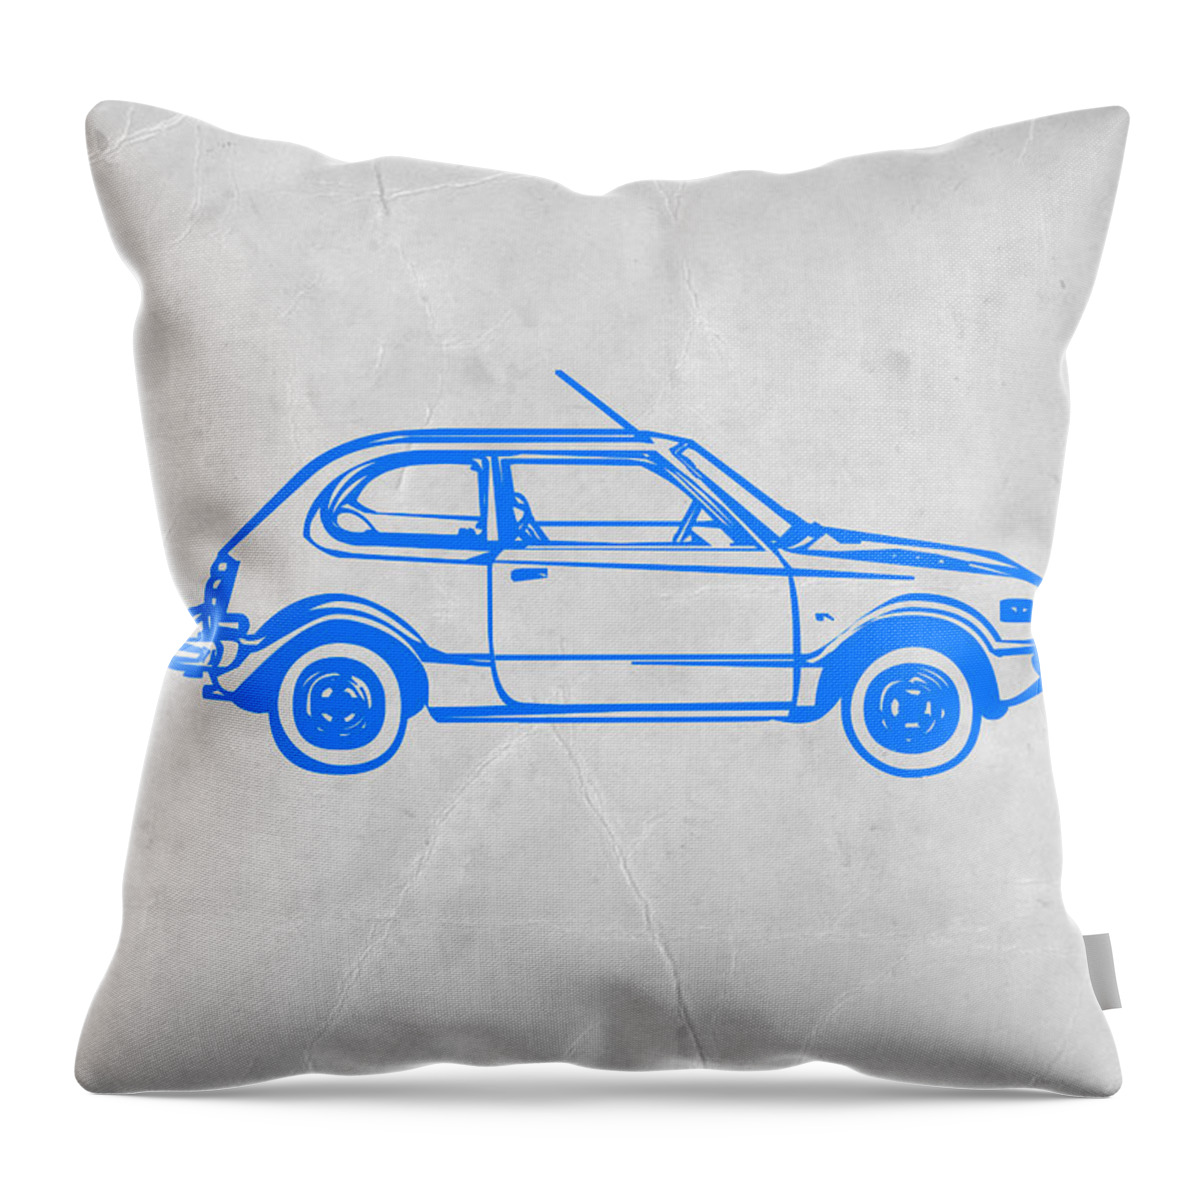 Classic Car Throw Pillow featuring the painting Little Car by Naxart Studio